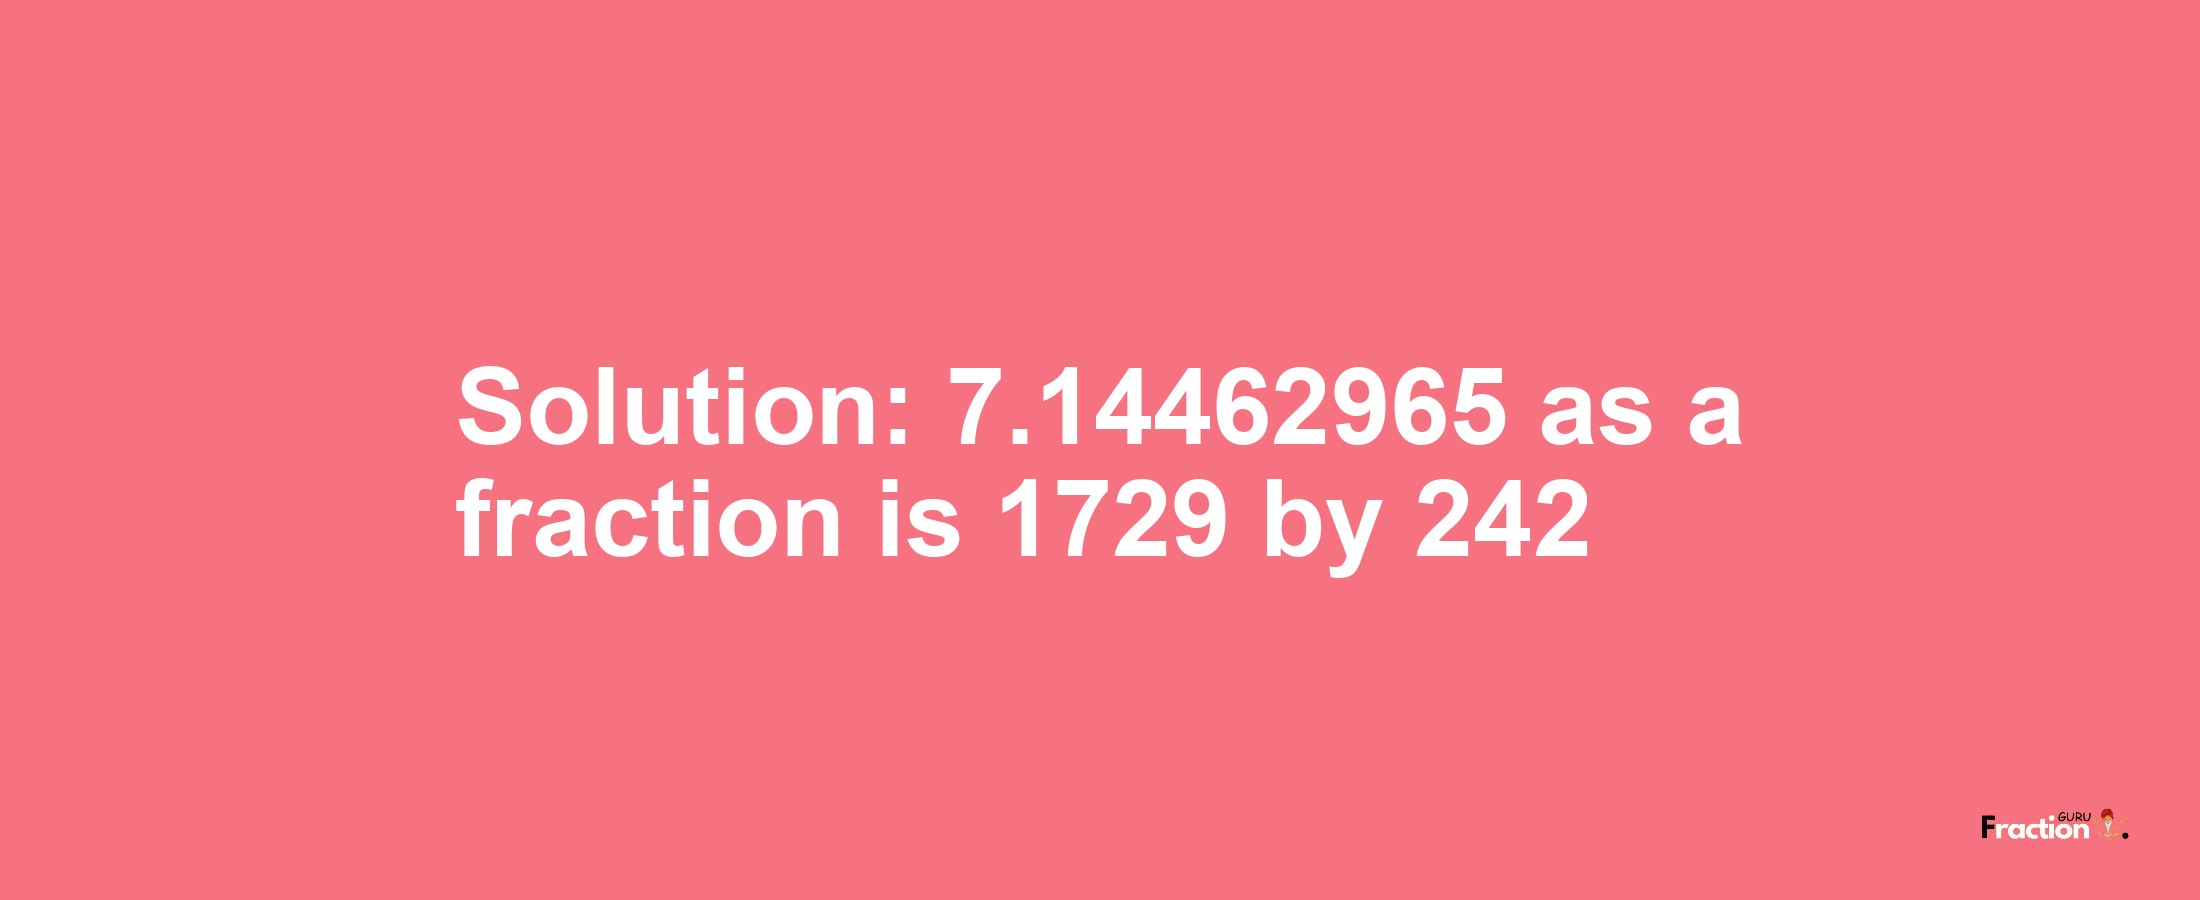 Solution:7.14462965 as a fraction is 1729/242